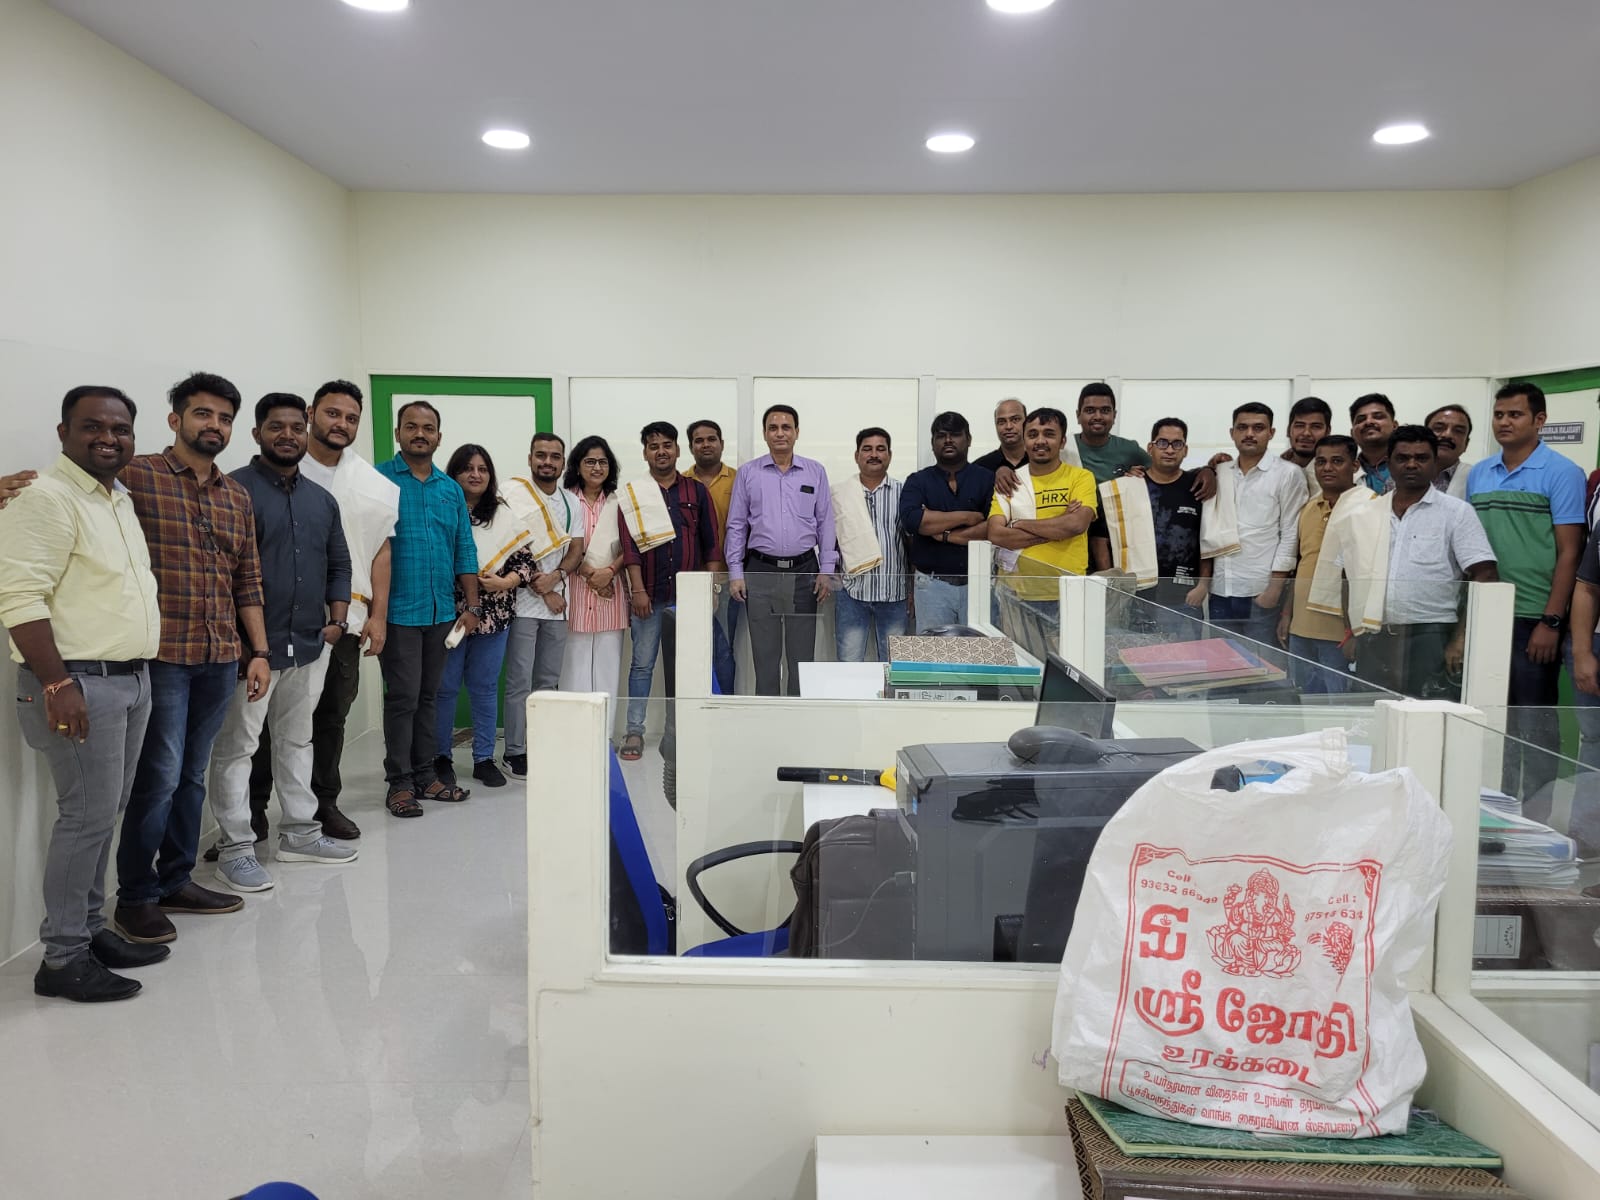 New plant and Office visit at Chennai - welcome by CWC Chennai !!